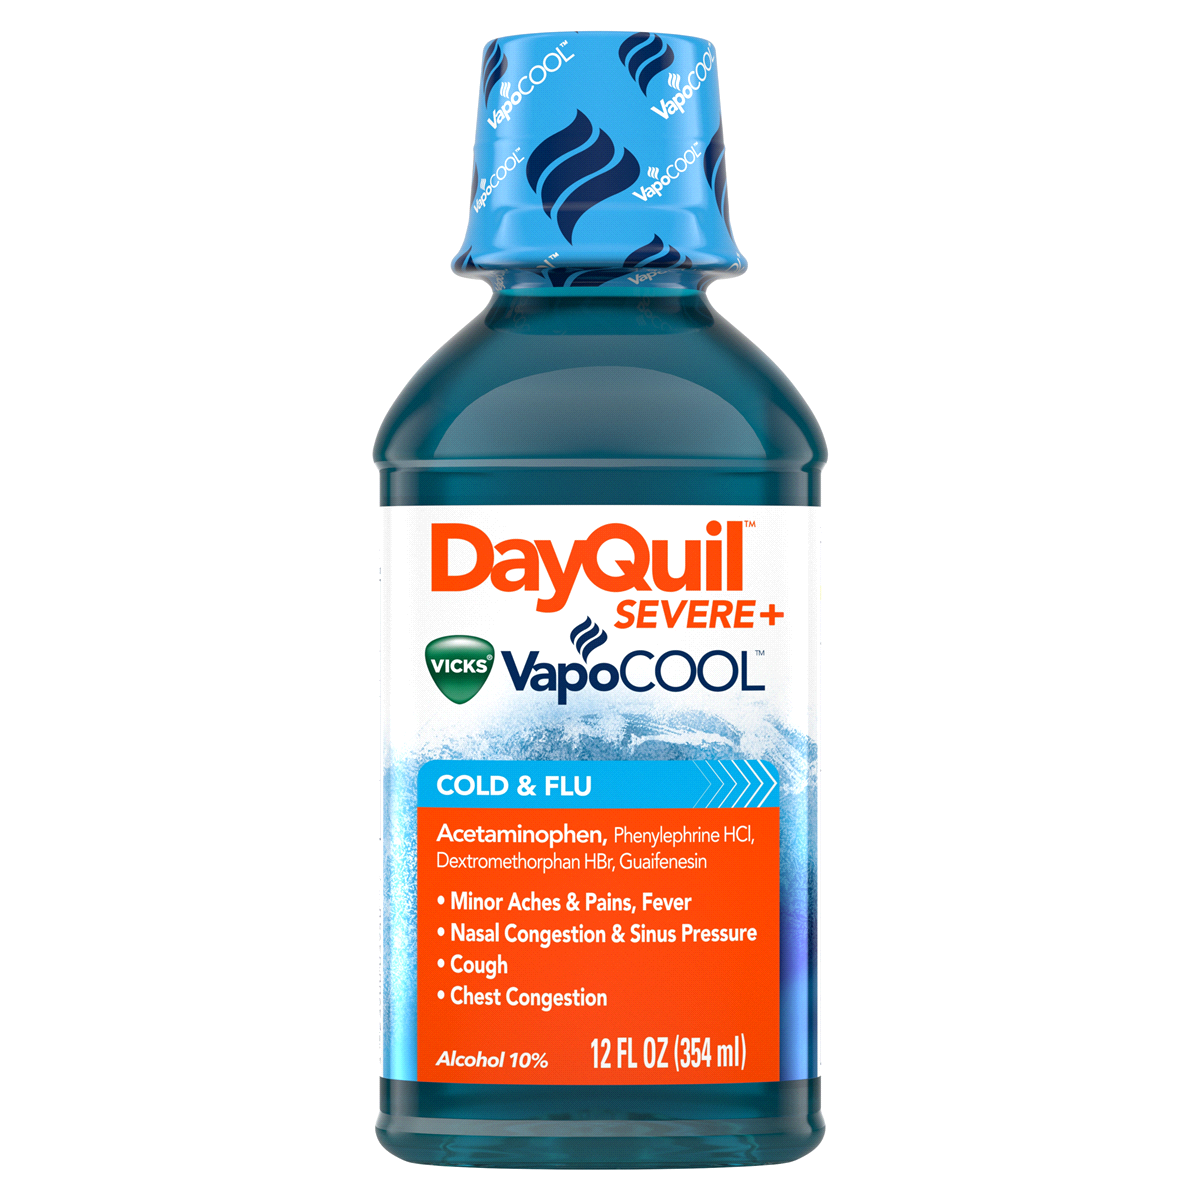 Vicks DayQuil Severe with VapoCool Daytime Cough, Cold and Flu Relief Liquid, 12 FL OZ